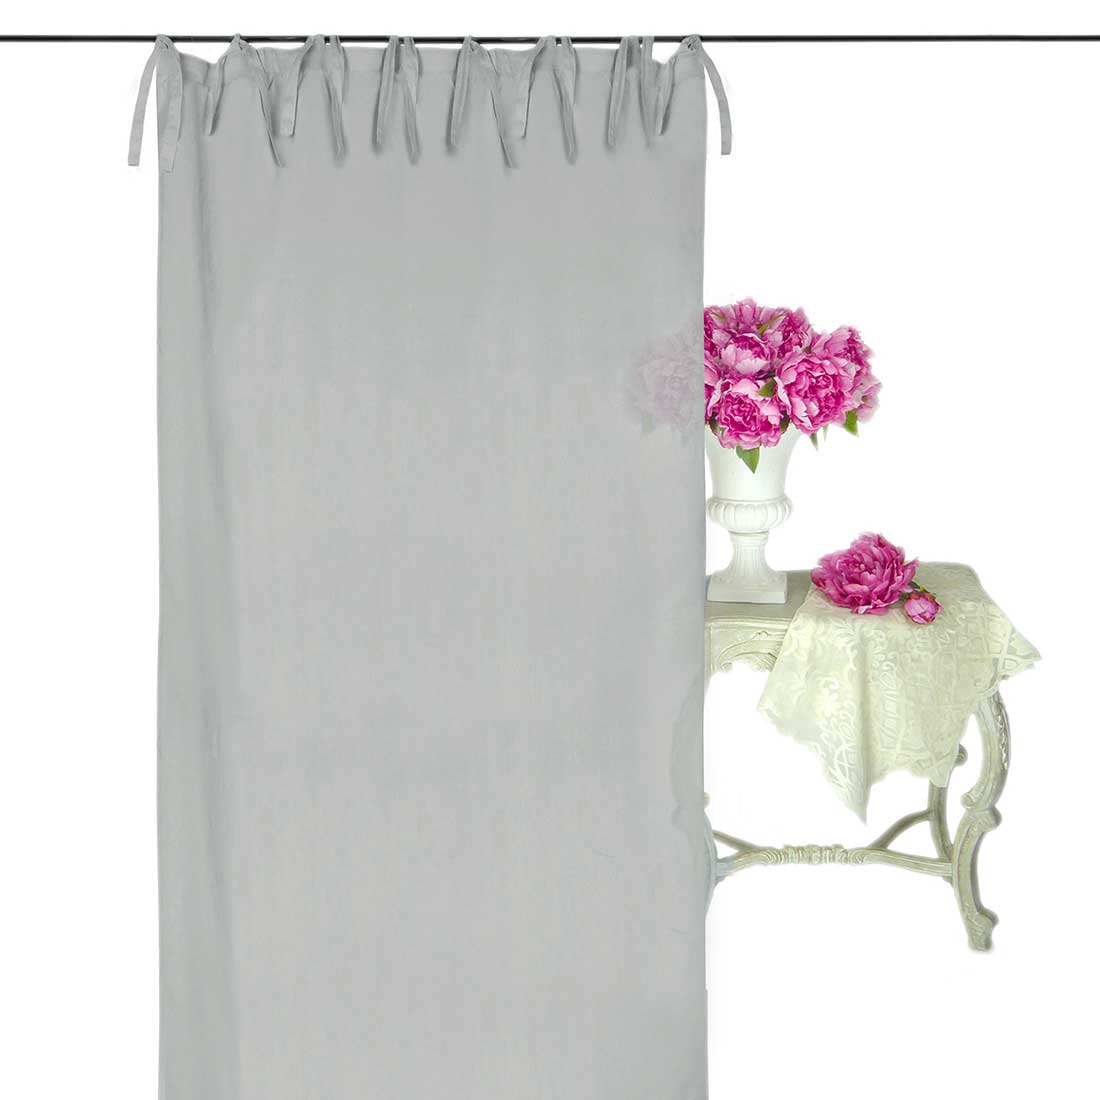 Shabby Chic Vorhang Etoile Basic Collection 135 x 290 cm Graue Farbe